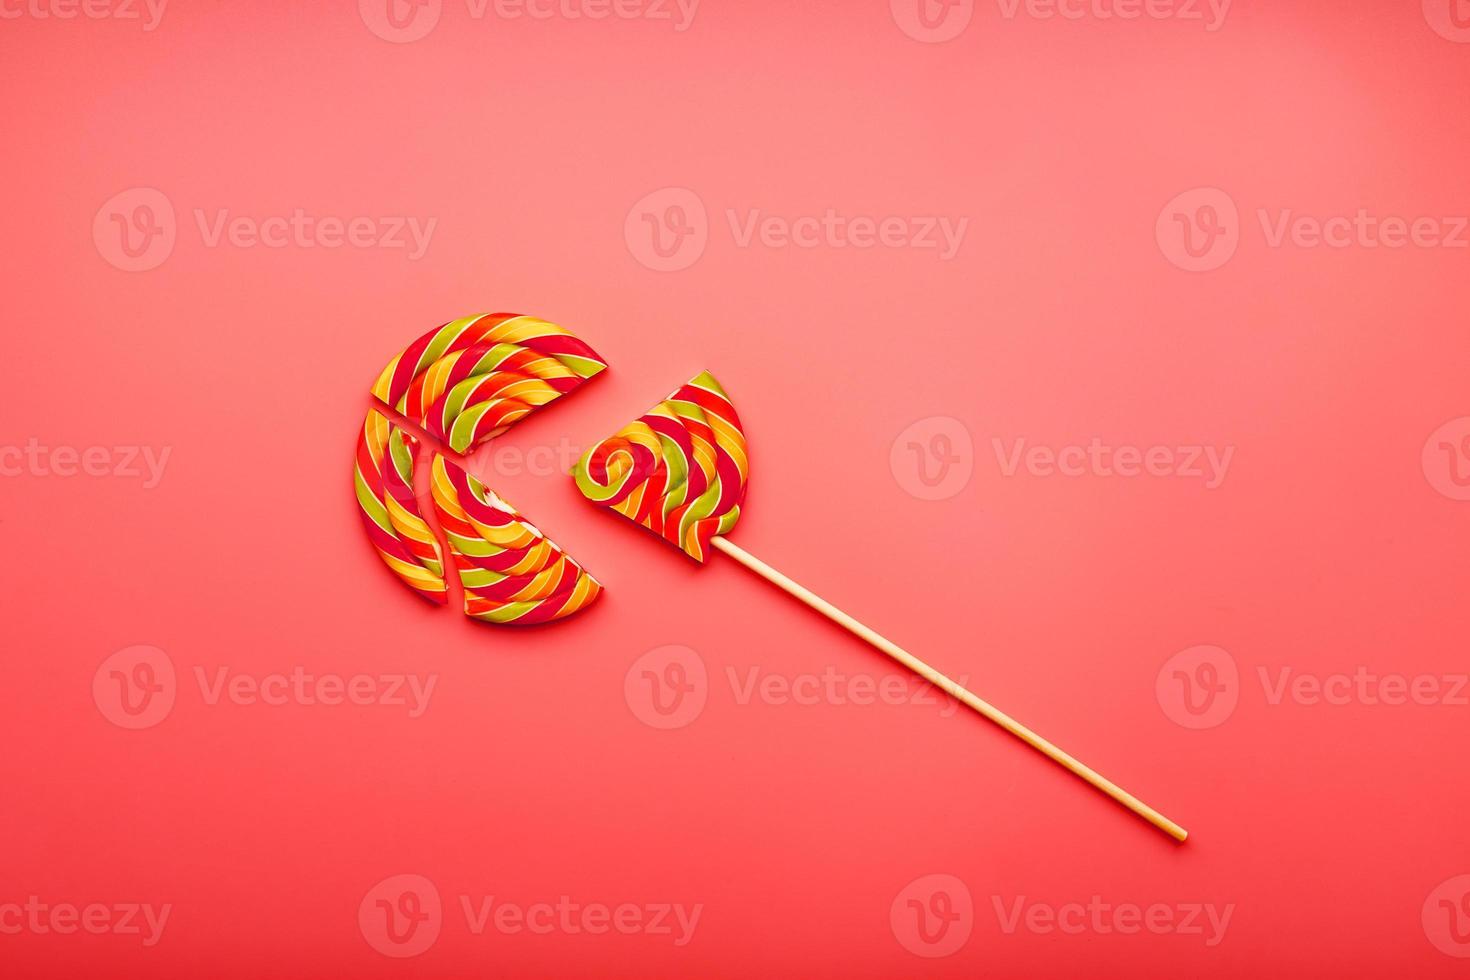 Lollipop broken into pieces on pink background, top view with copy space. photo